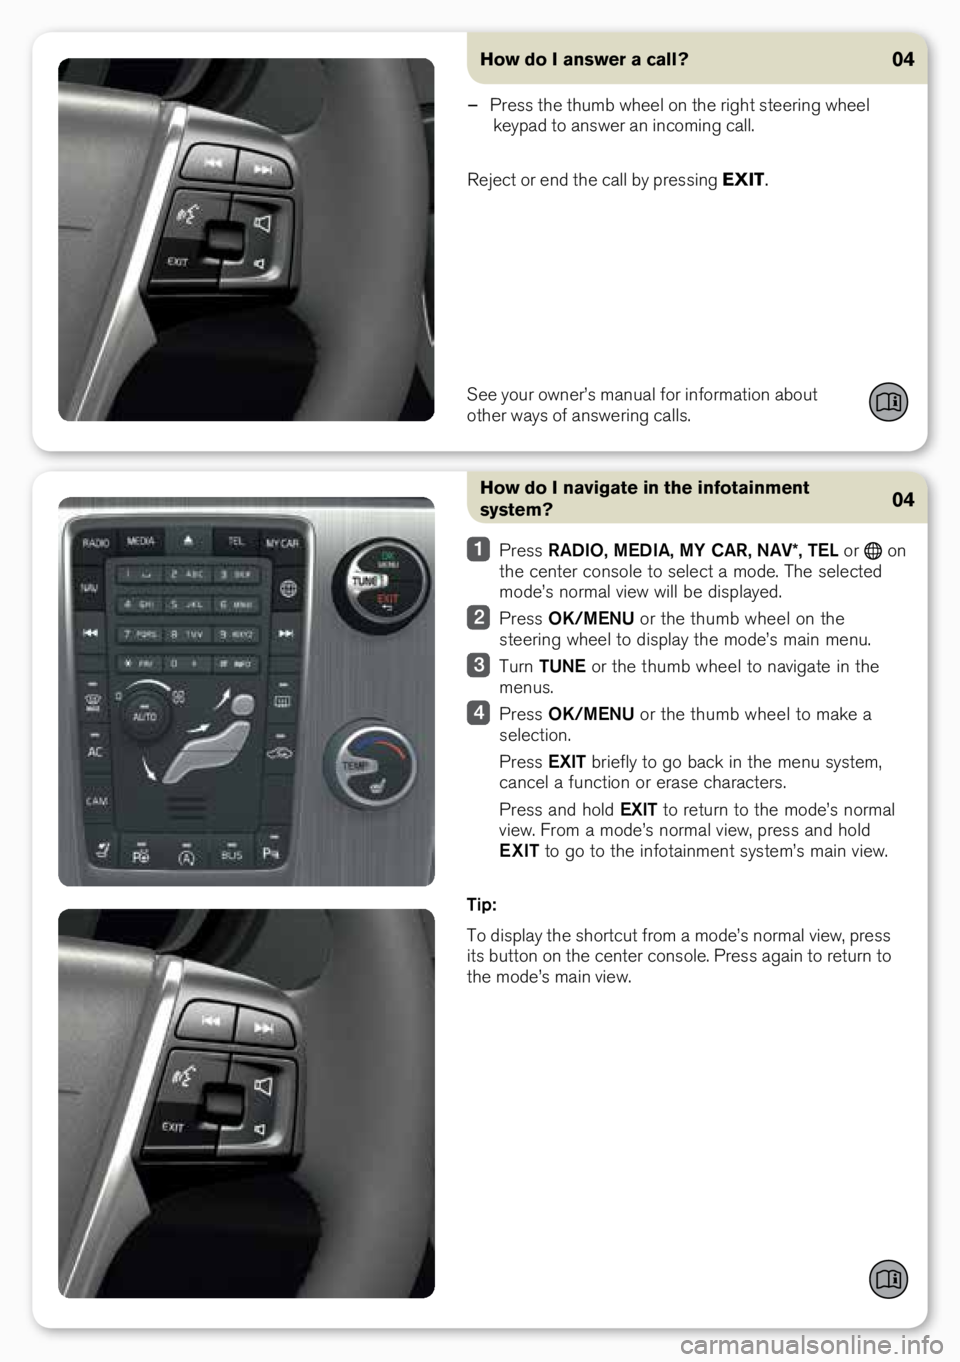 VOLVO V60 2016  Quick Guide How do I navigate in the infotainment 
system?
 Pre\f\f  RADIO,  MEDIA, MY CAR,  NAV*, TEL \br  \bn 
the center c\bn\f\ble t\b \felect a m\bde. The \felected 
m\bde’\f n\brmal view will be di\fplaye